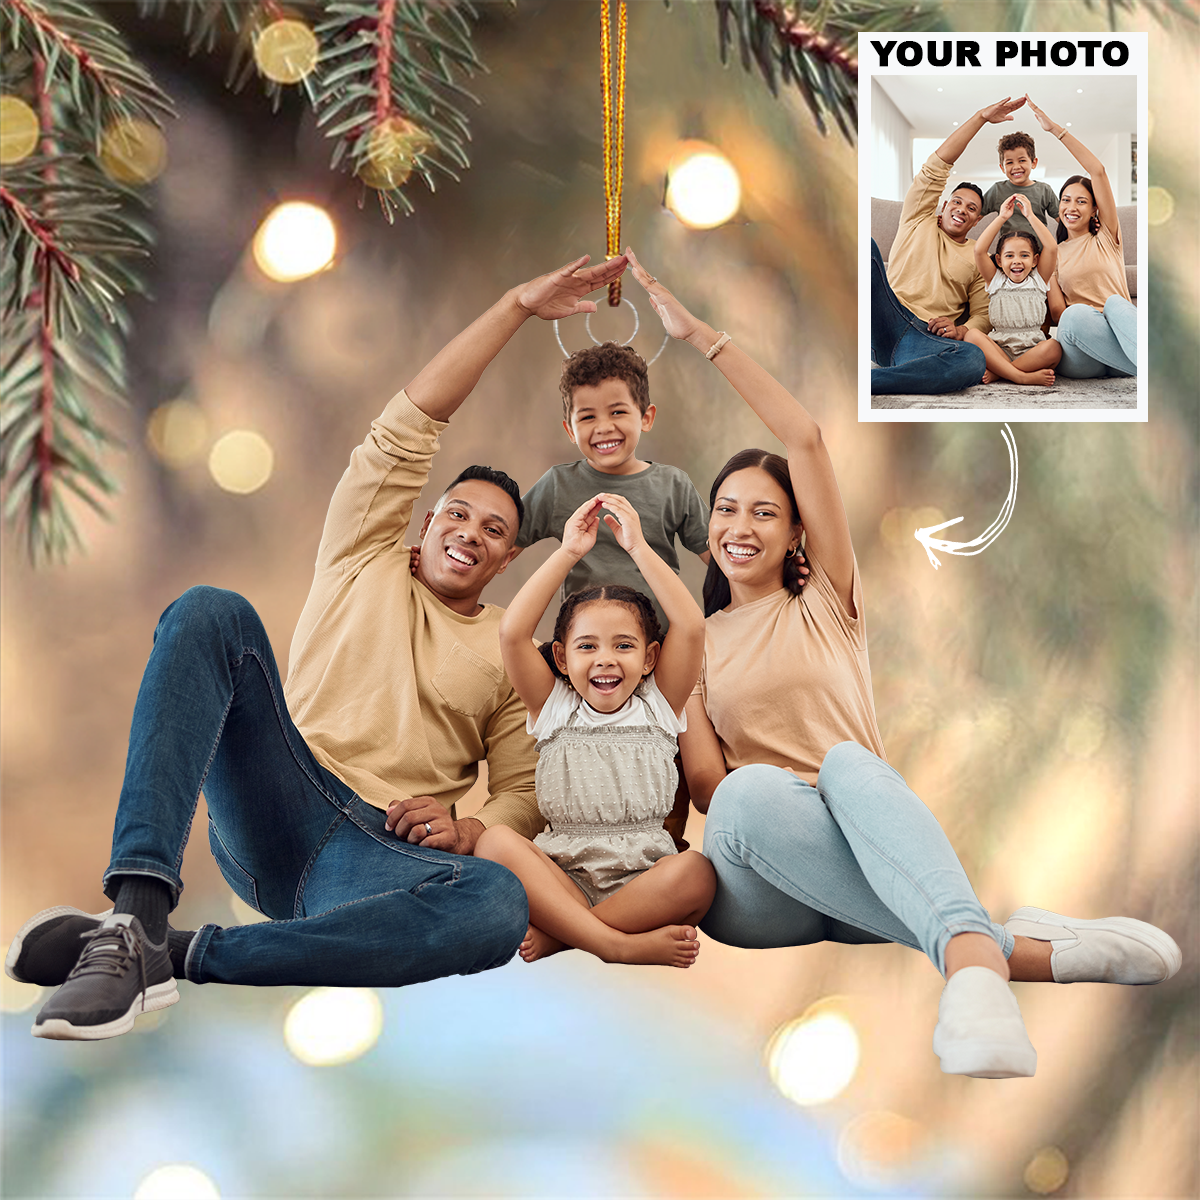 Merry Christmas Capture Your Moments - Personalized Custom Photo Mica Ornament - Christmas Gift For Dad, Mom, Grandma, Grandpa, Family Members